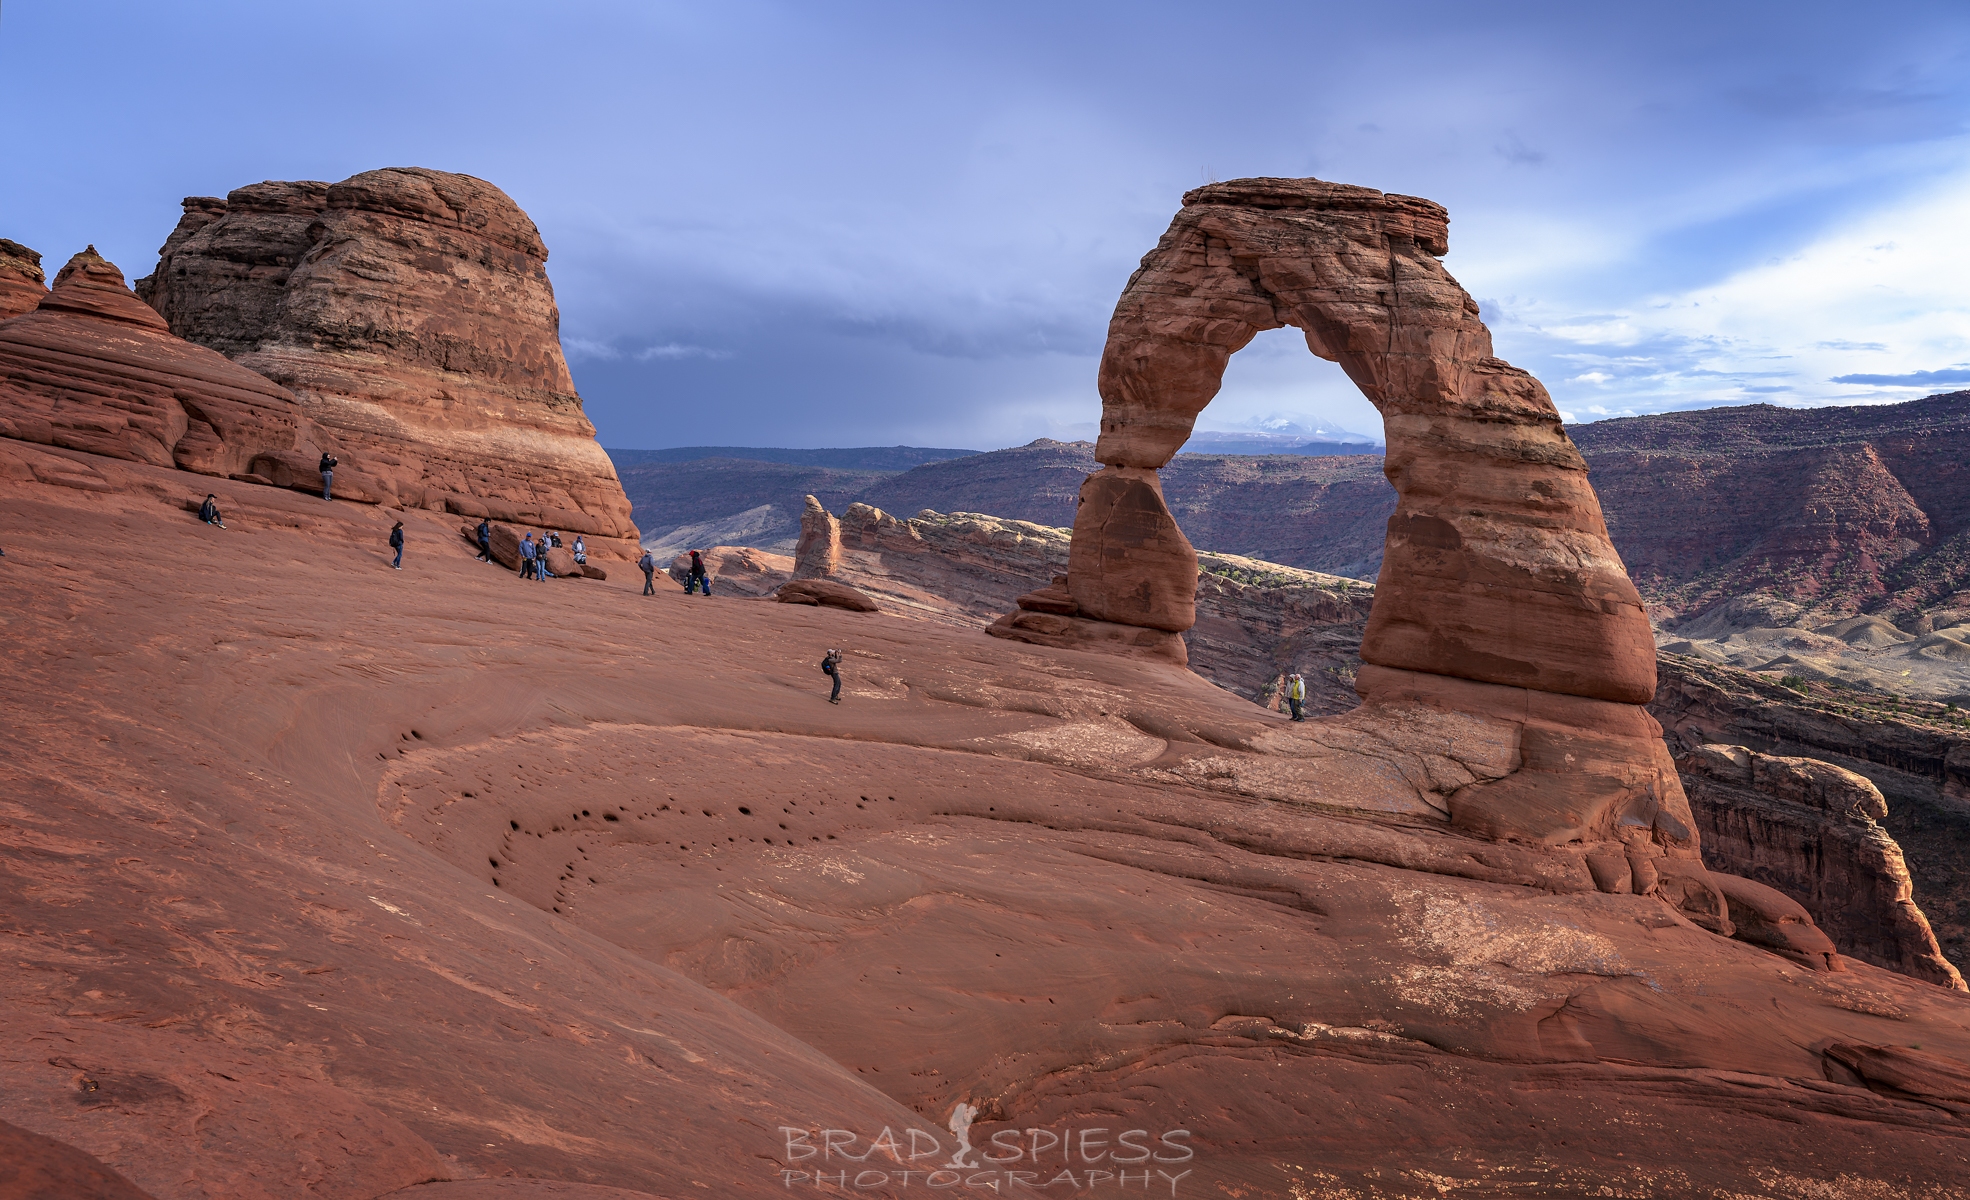 A tighter shot of Delicate Arch with people in the composition.